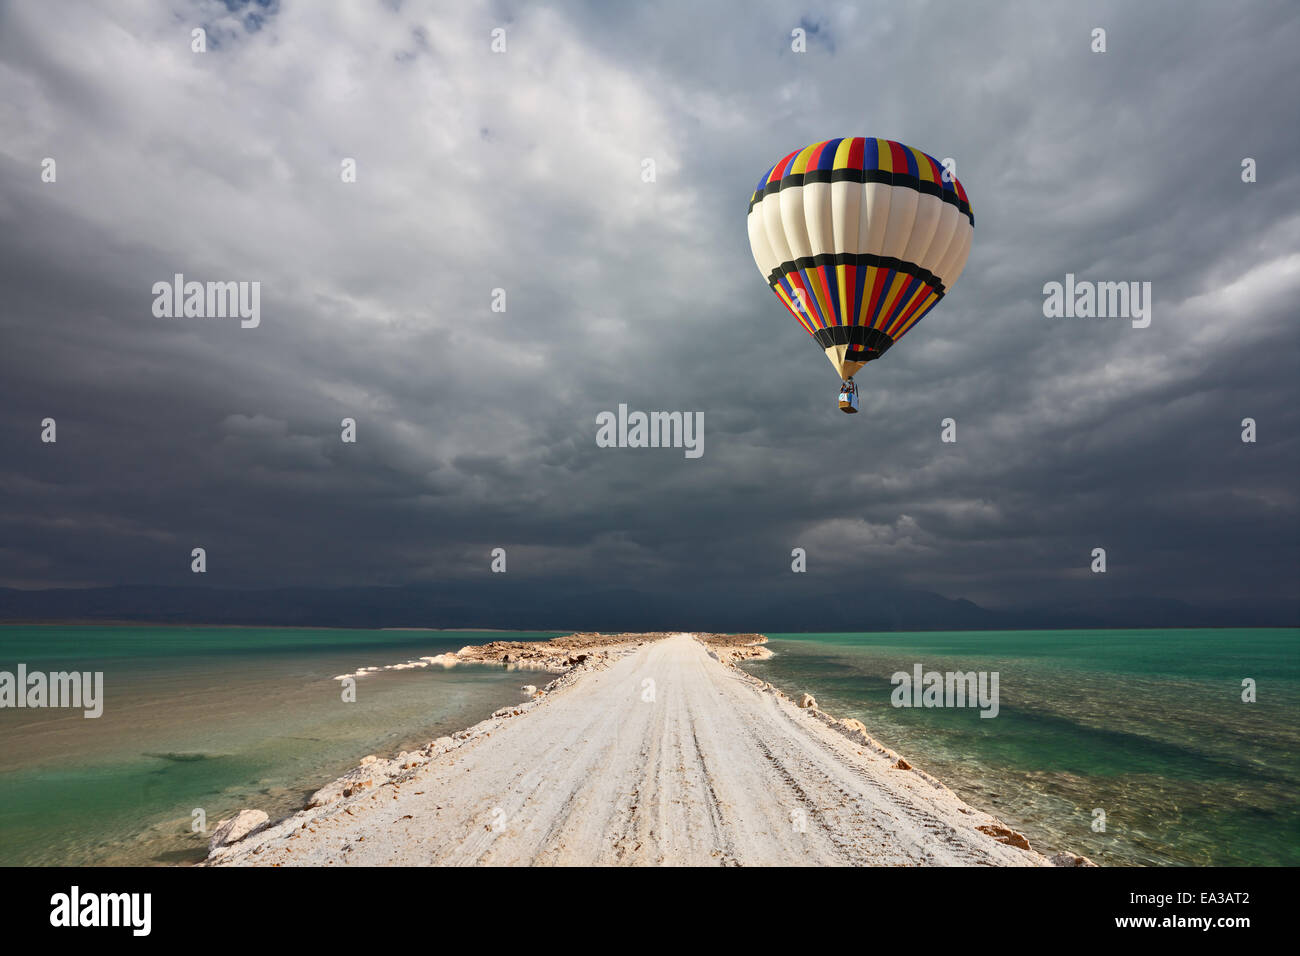 The balloon flying in a thunderstorm Stock Photo